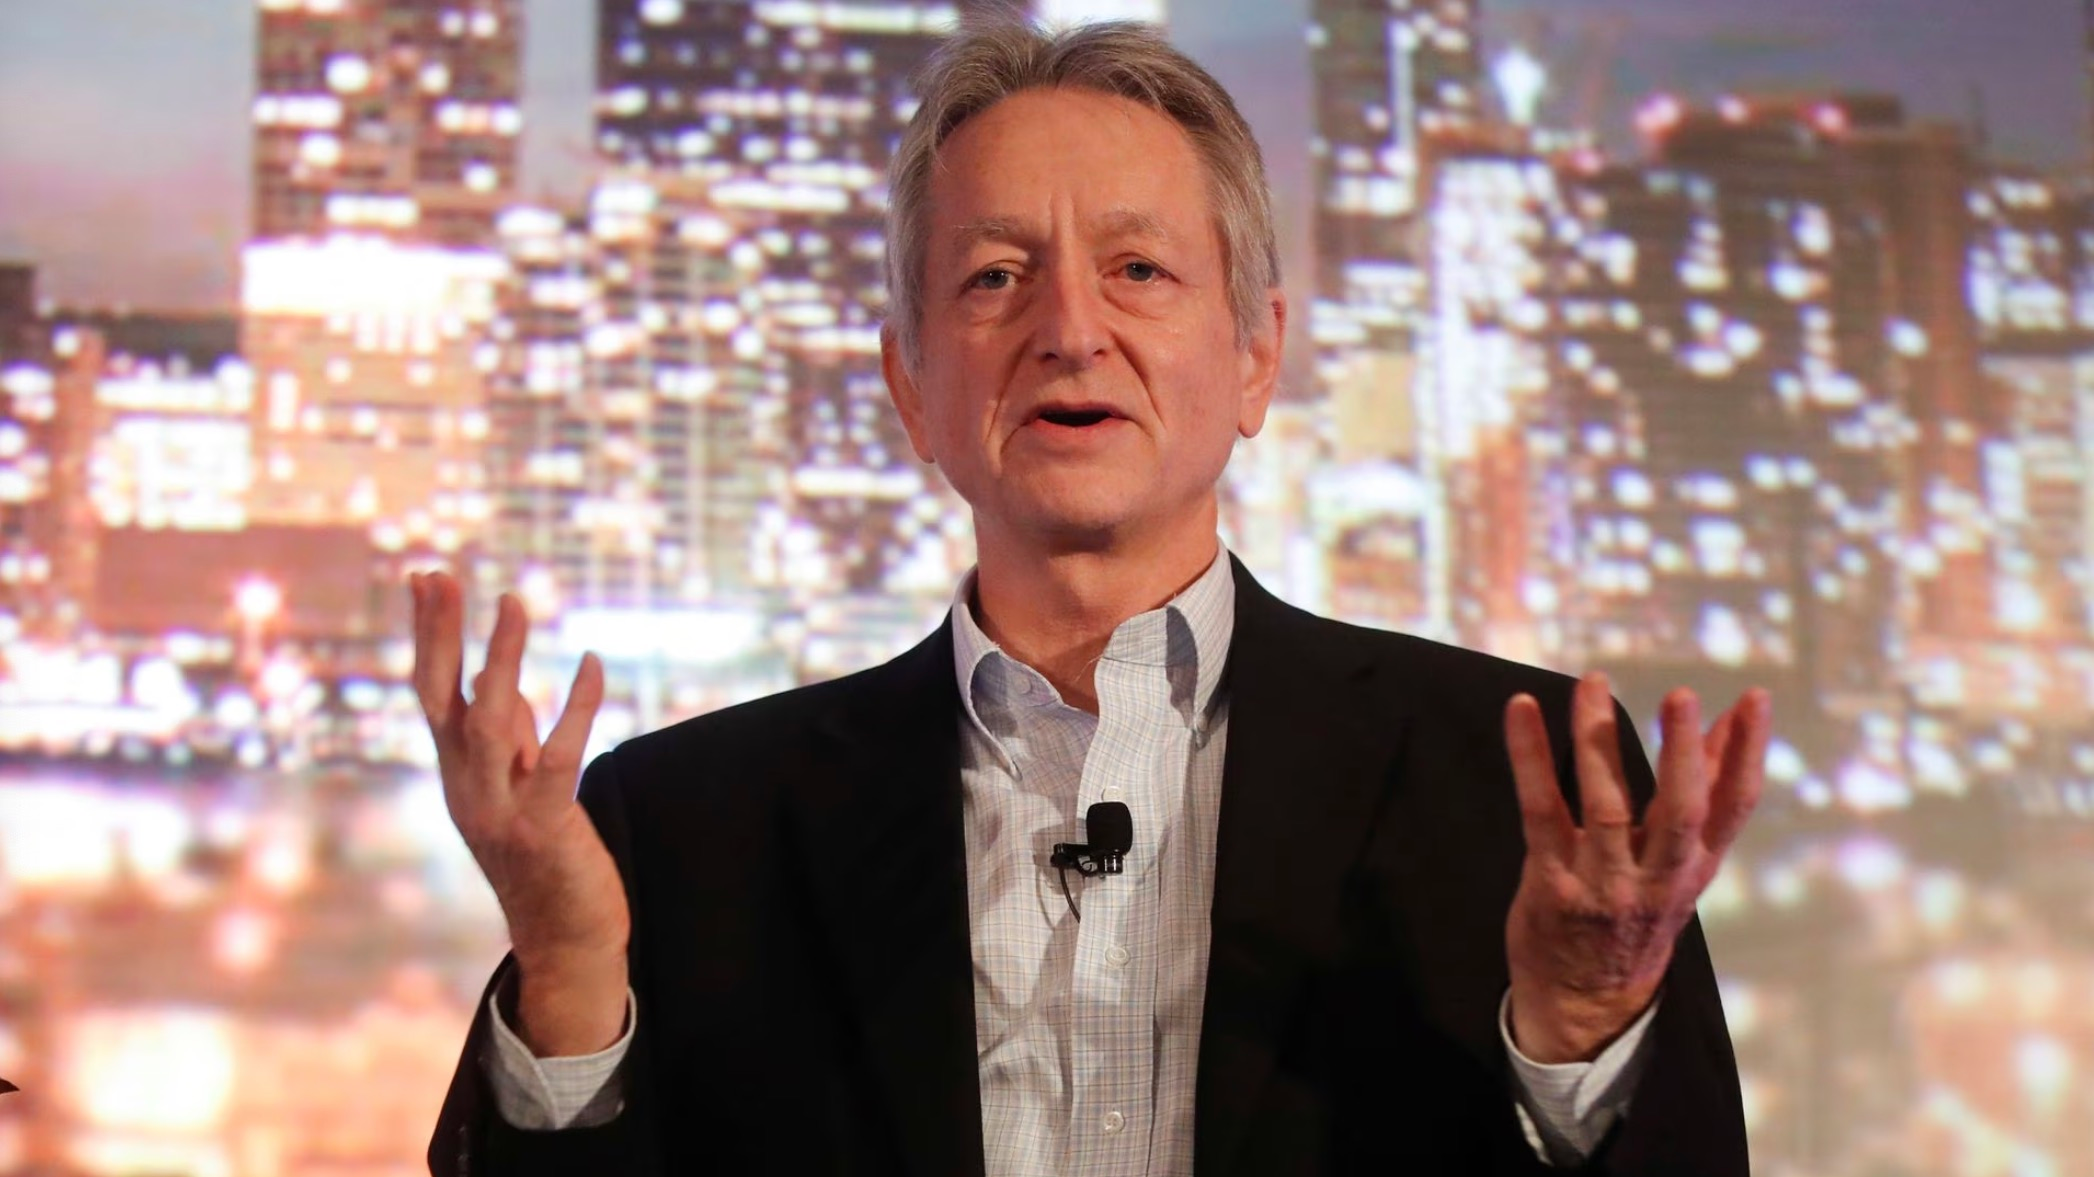 AI pioneer Geoffrey Hinton speaks at the Thomson Reuters Financial and Risk Summit in Toronto, Canada, December 4, 2017. /Reuters